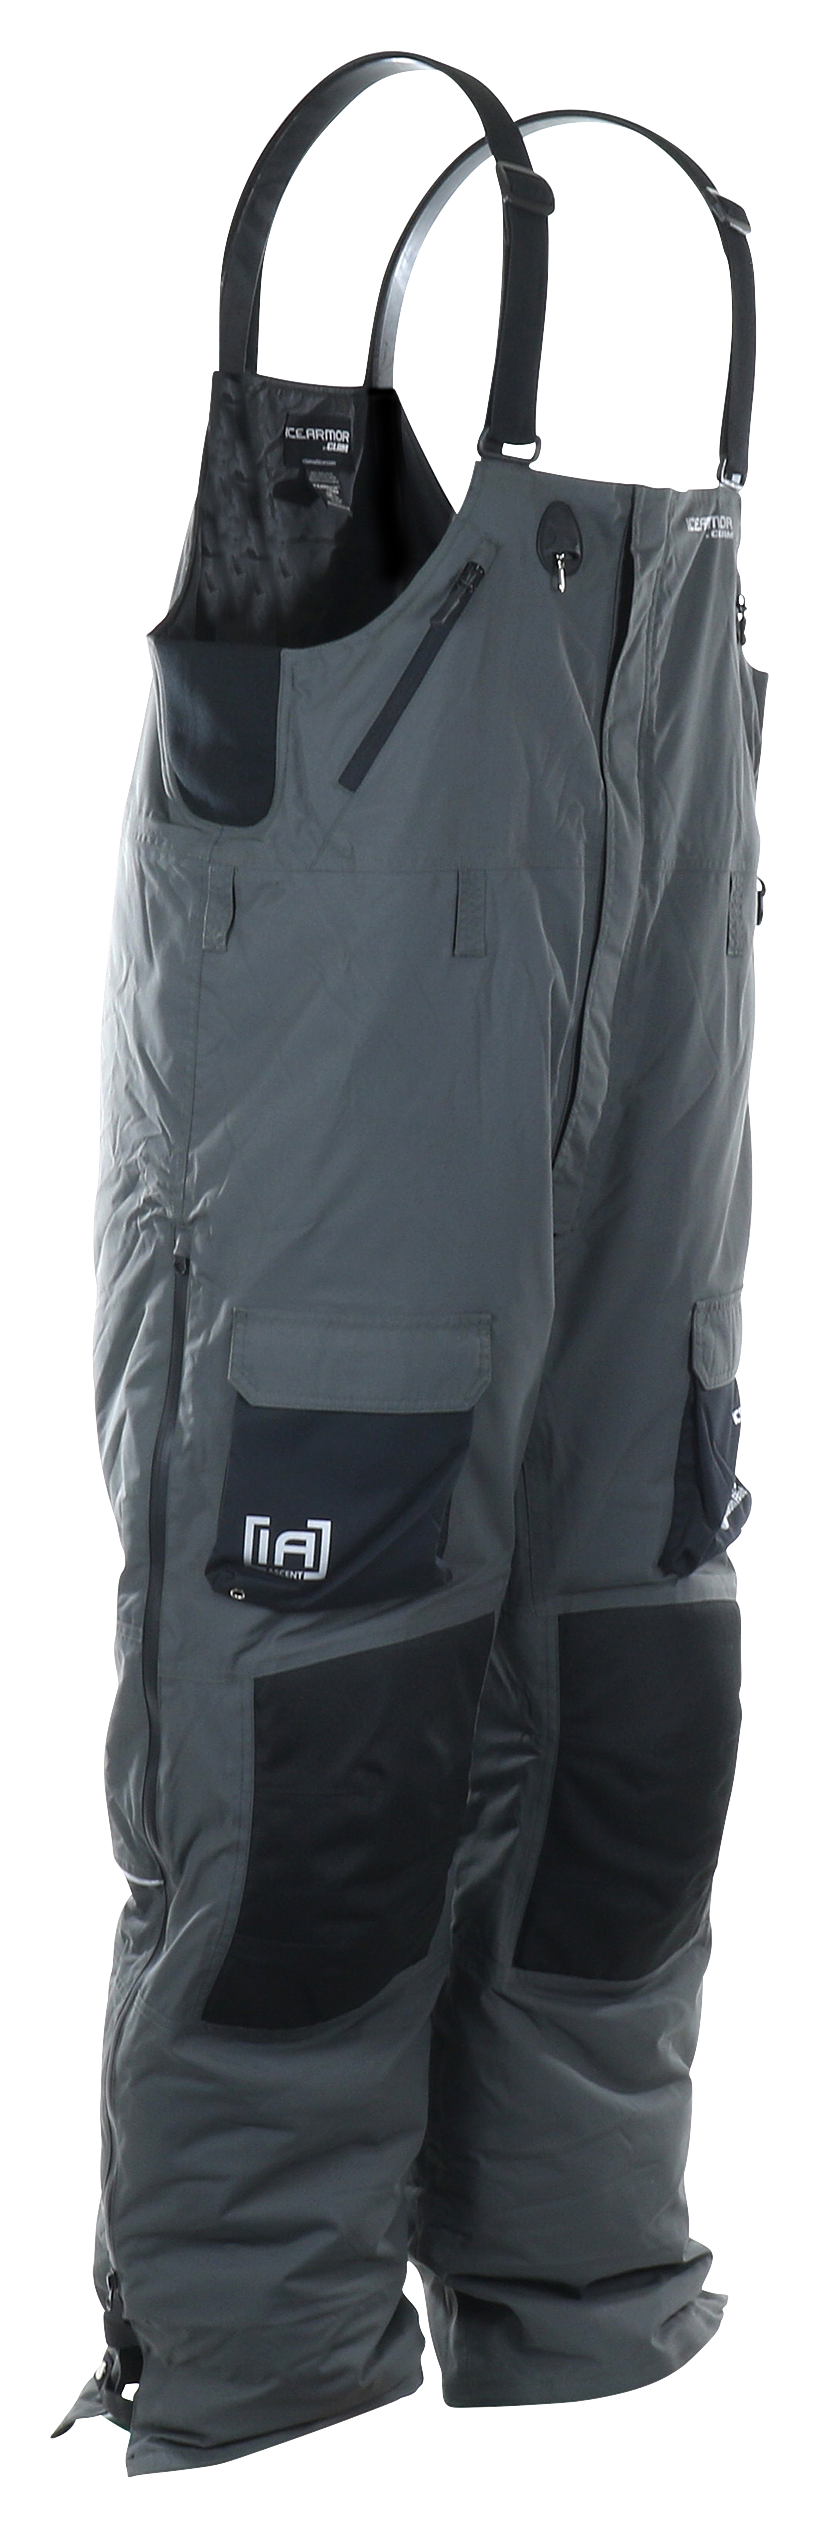 IceArmor by Clam Ascent Float Bibs for Men